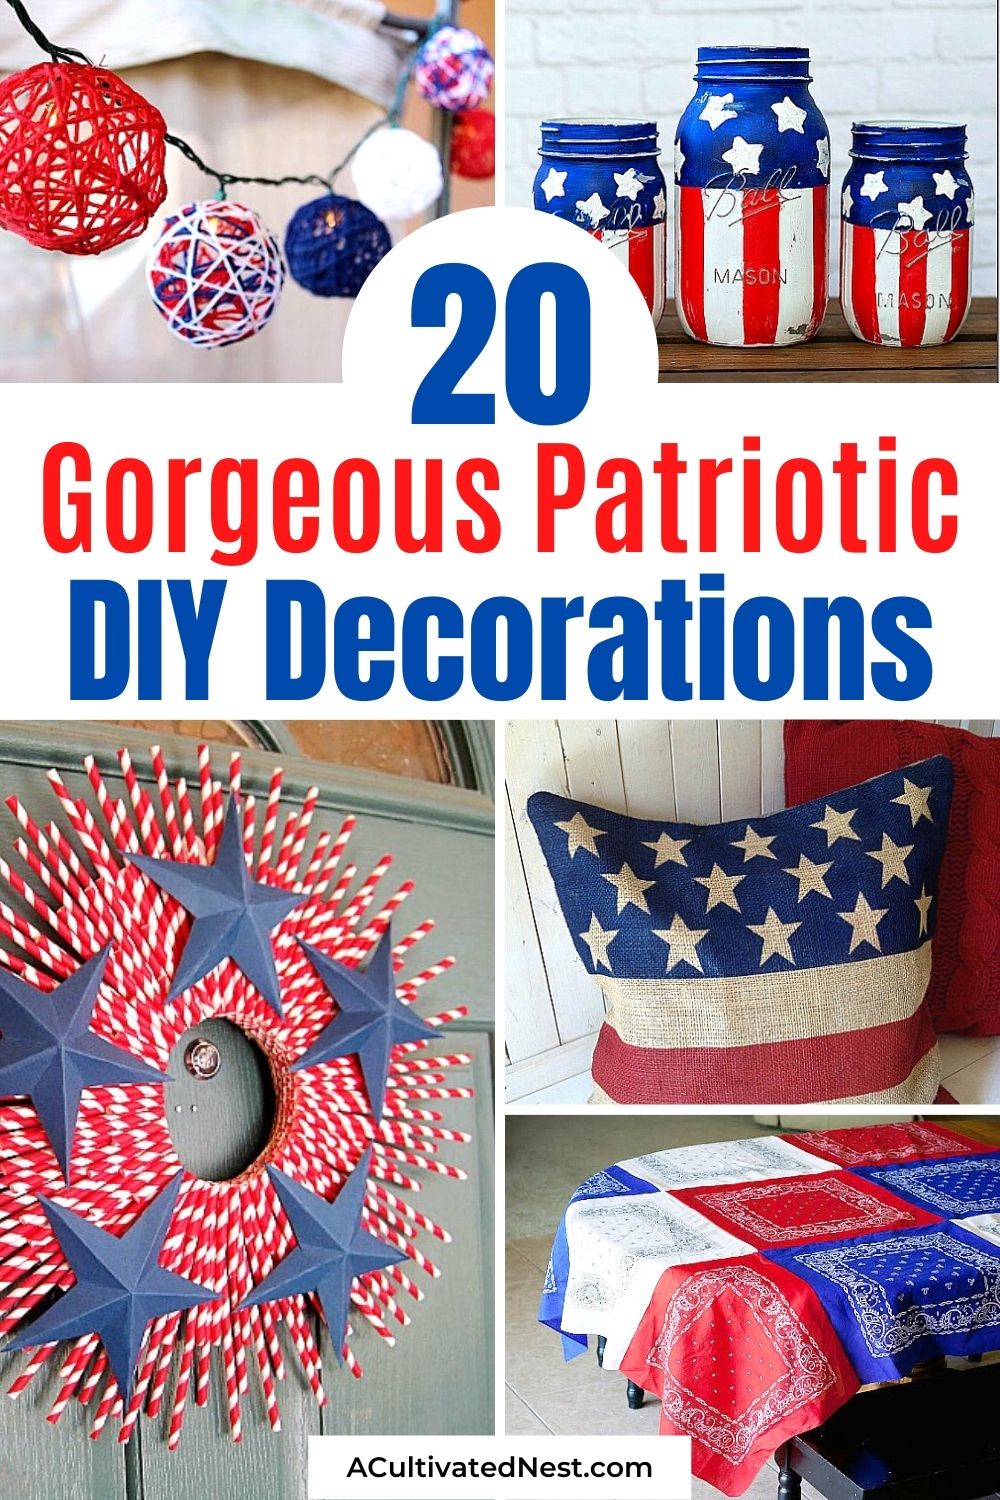 20 Creative Patriotic DIY Home Décor Projects- If you want to add a fun and festive patriotic touch to your home for Memorial Day or the Fourth of July, then you need to check out these patriotic DIY home decor projects! | #fourthOfJuly #memorialDay #patrioticDecor #diyProjects #ACultivatedNest